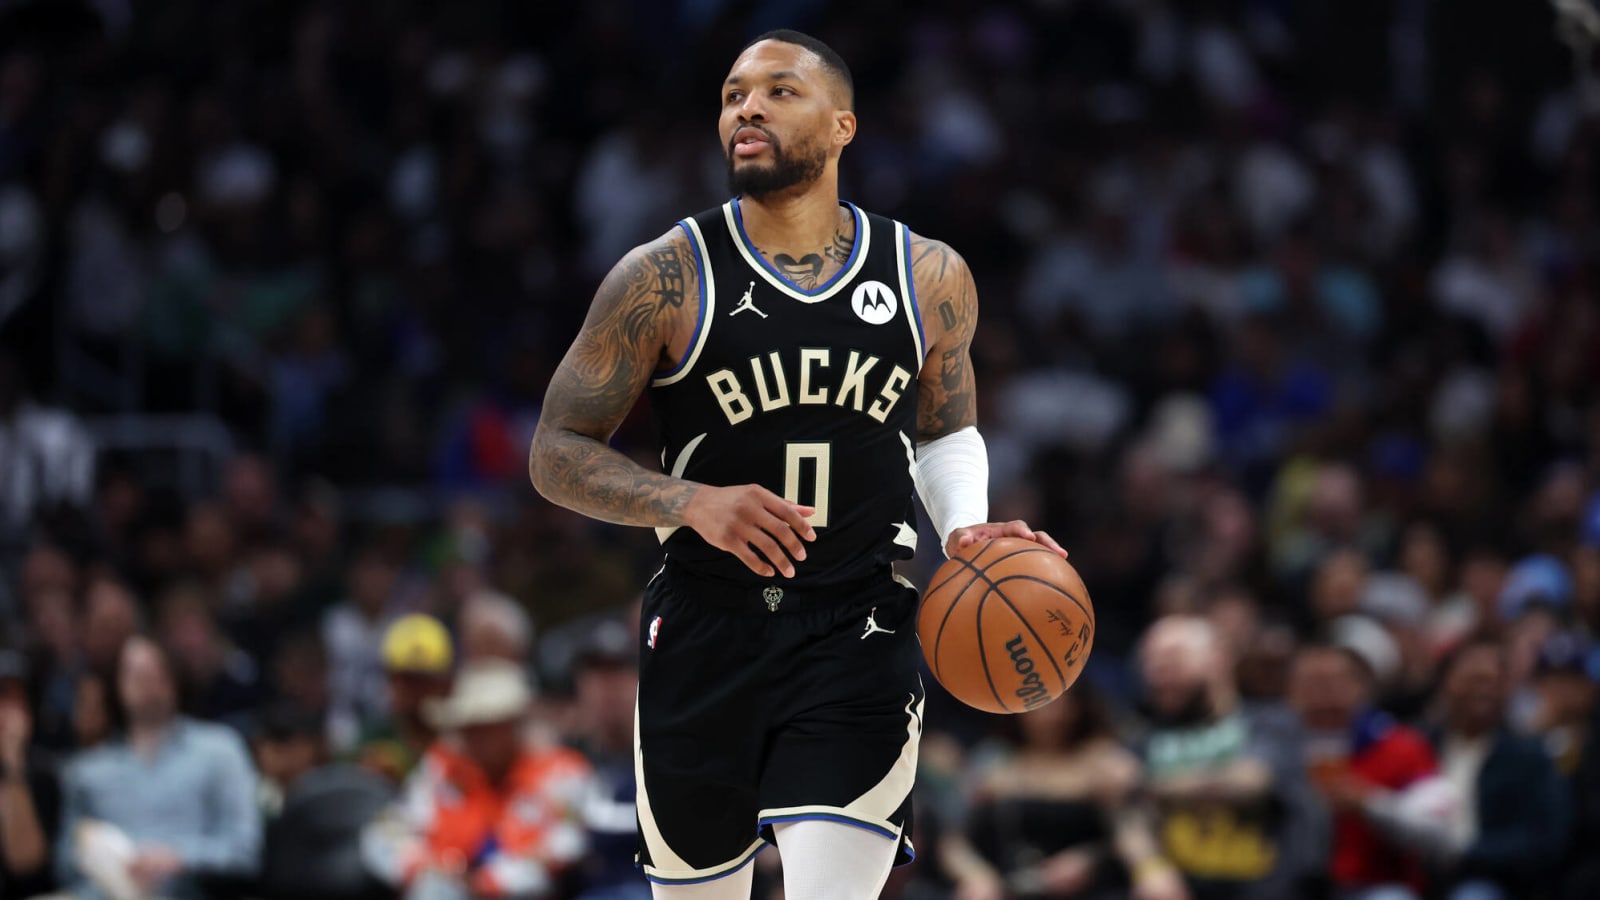 If Lillard needs to be the star, the Bucks may have a problem